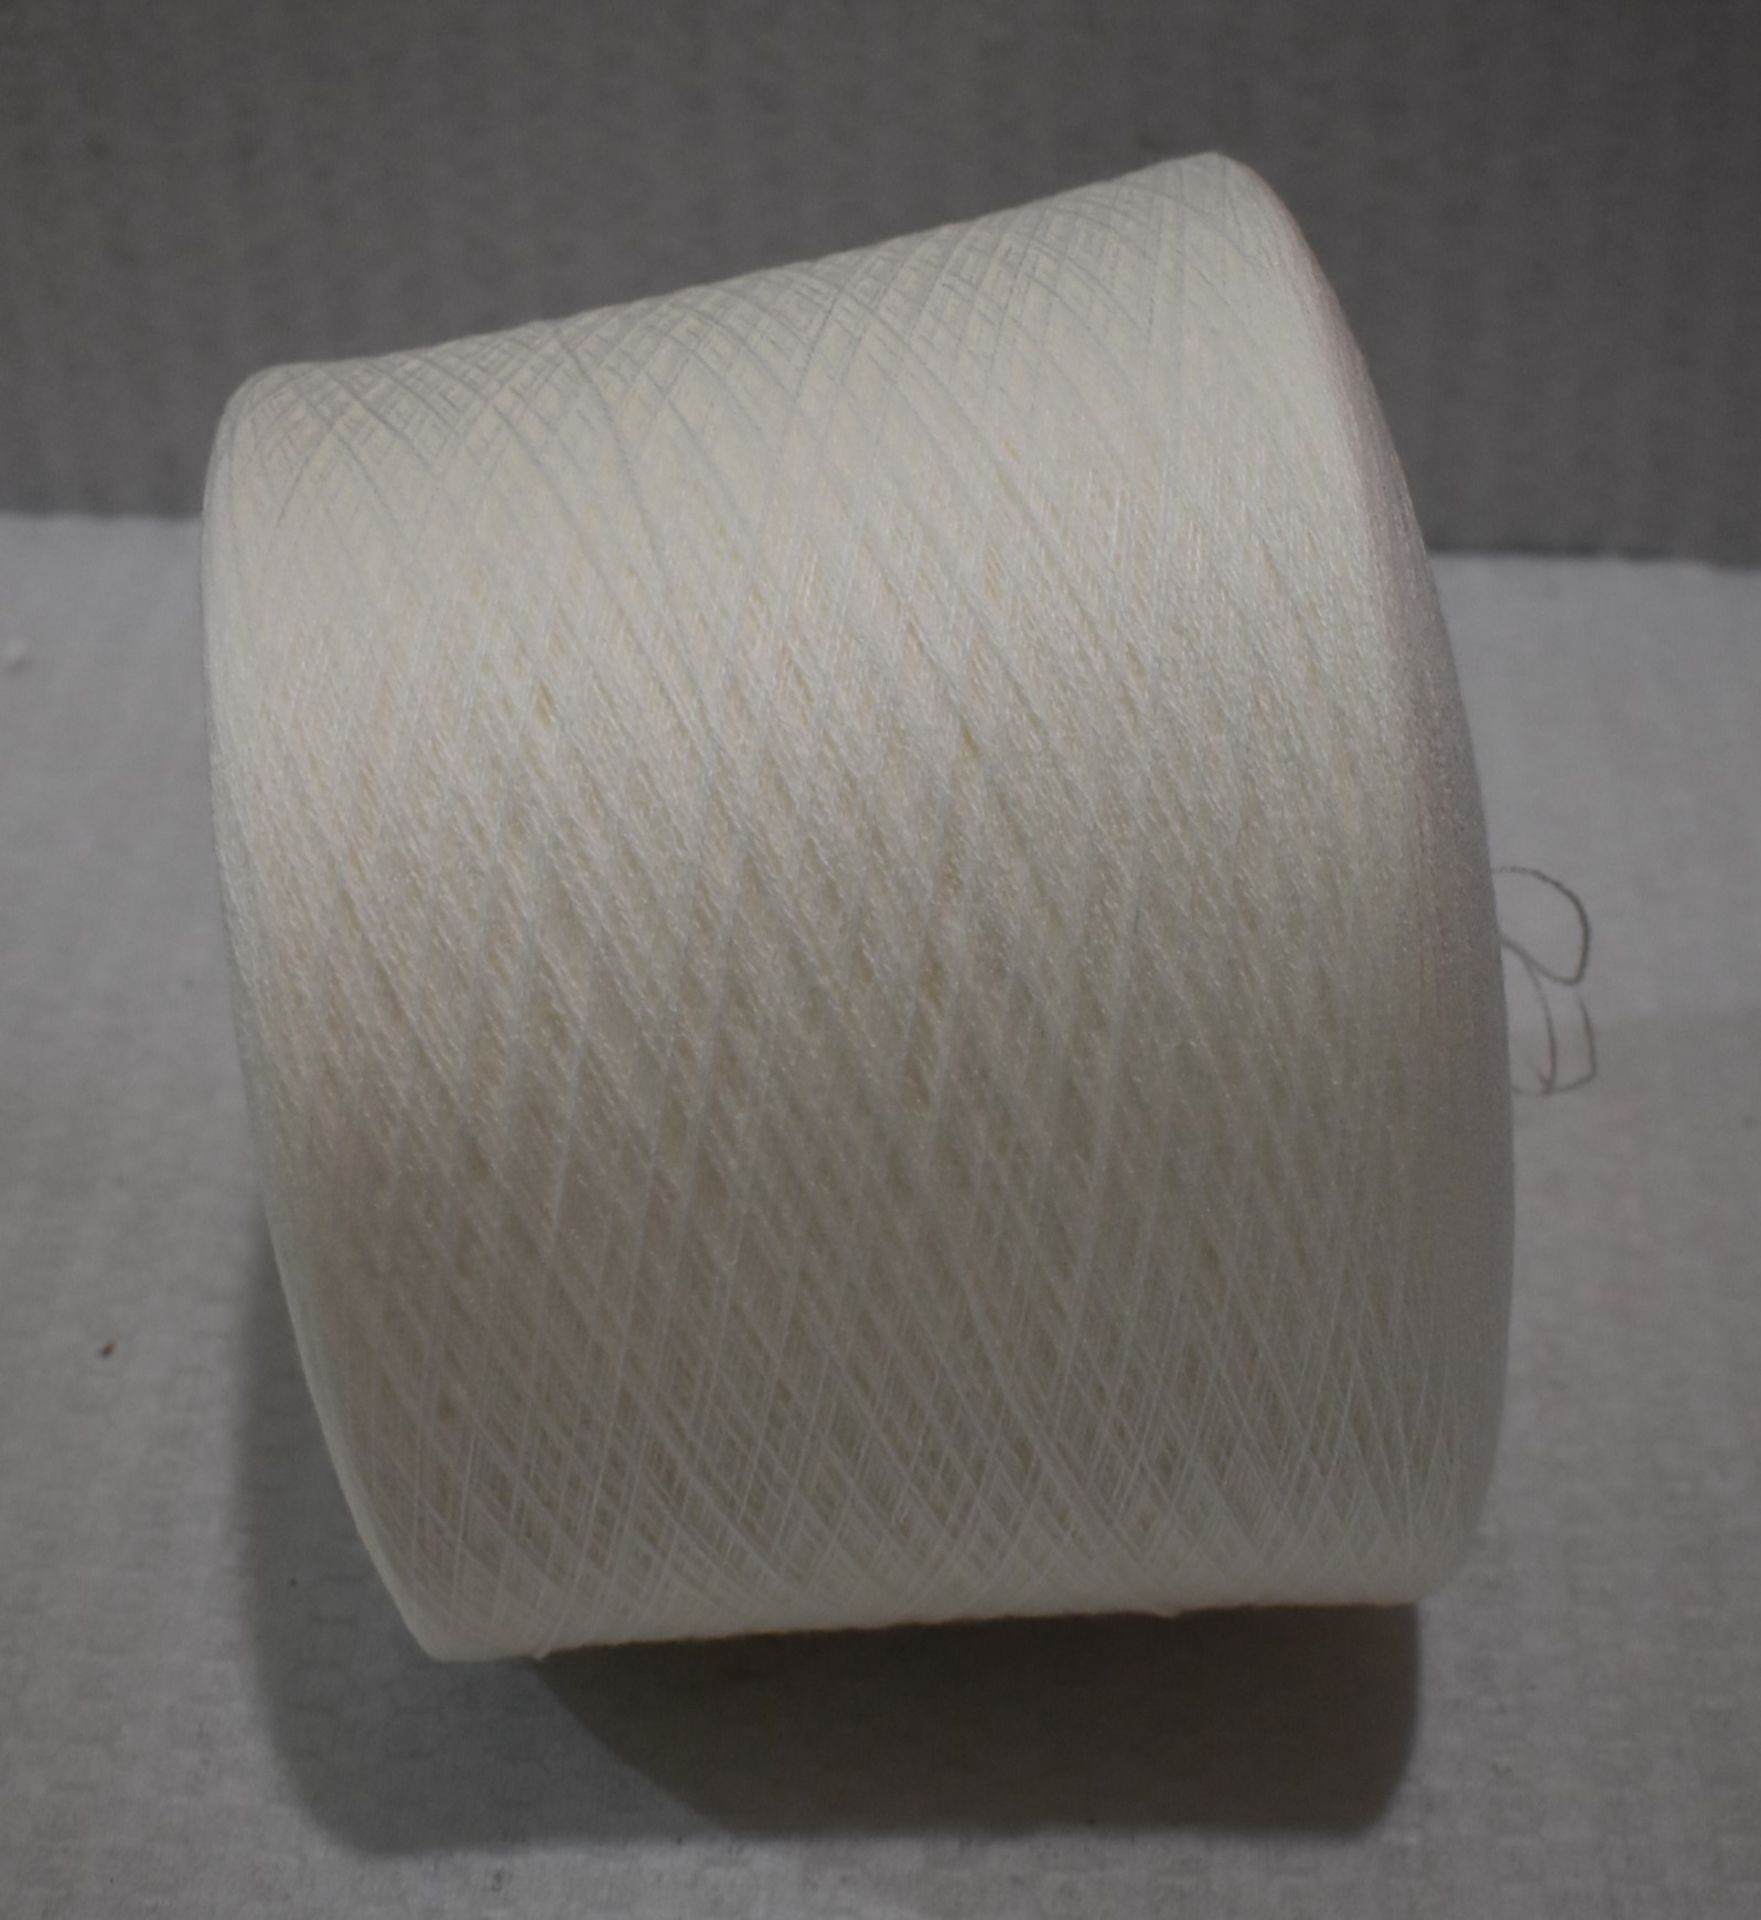 6 x Cones of 28/2 H.B 100% Acrylic Knitting Yarn - Colour: Ivory - Approx Weight: 1,300g - New Stock - Image 9 of 10